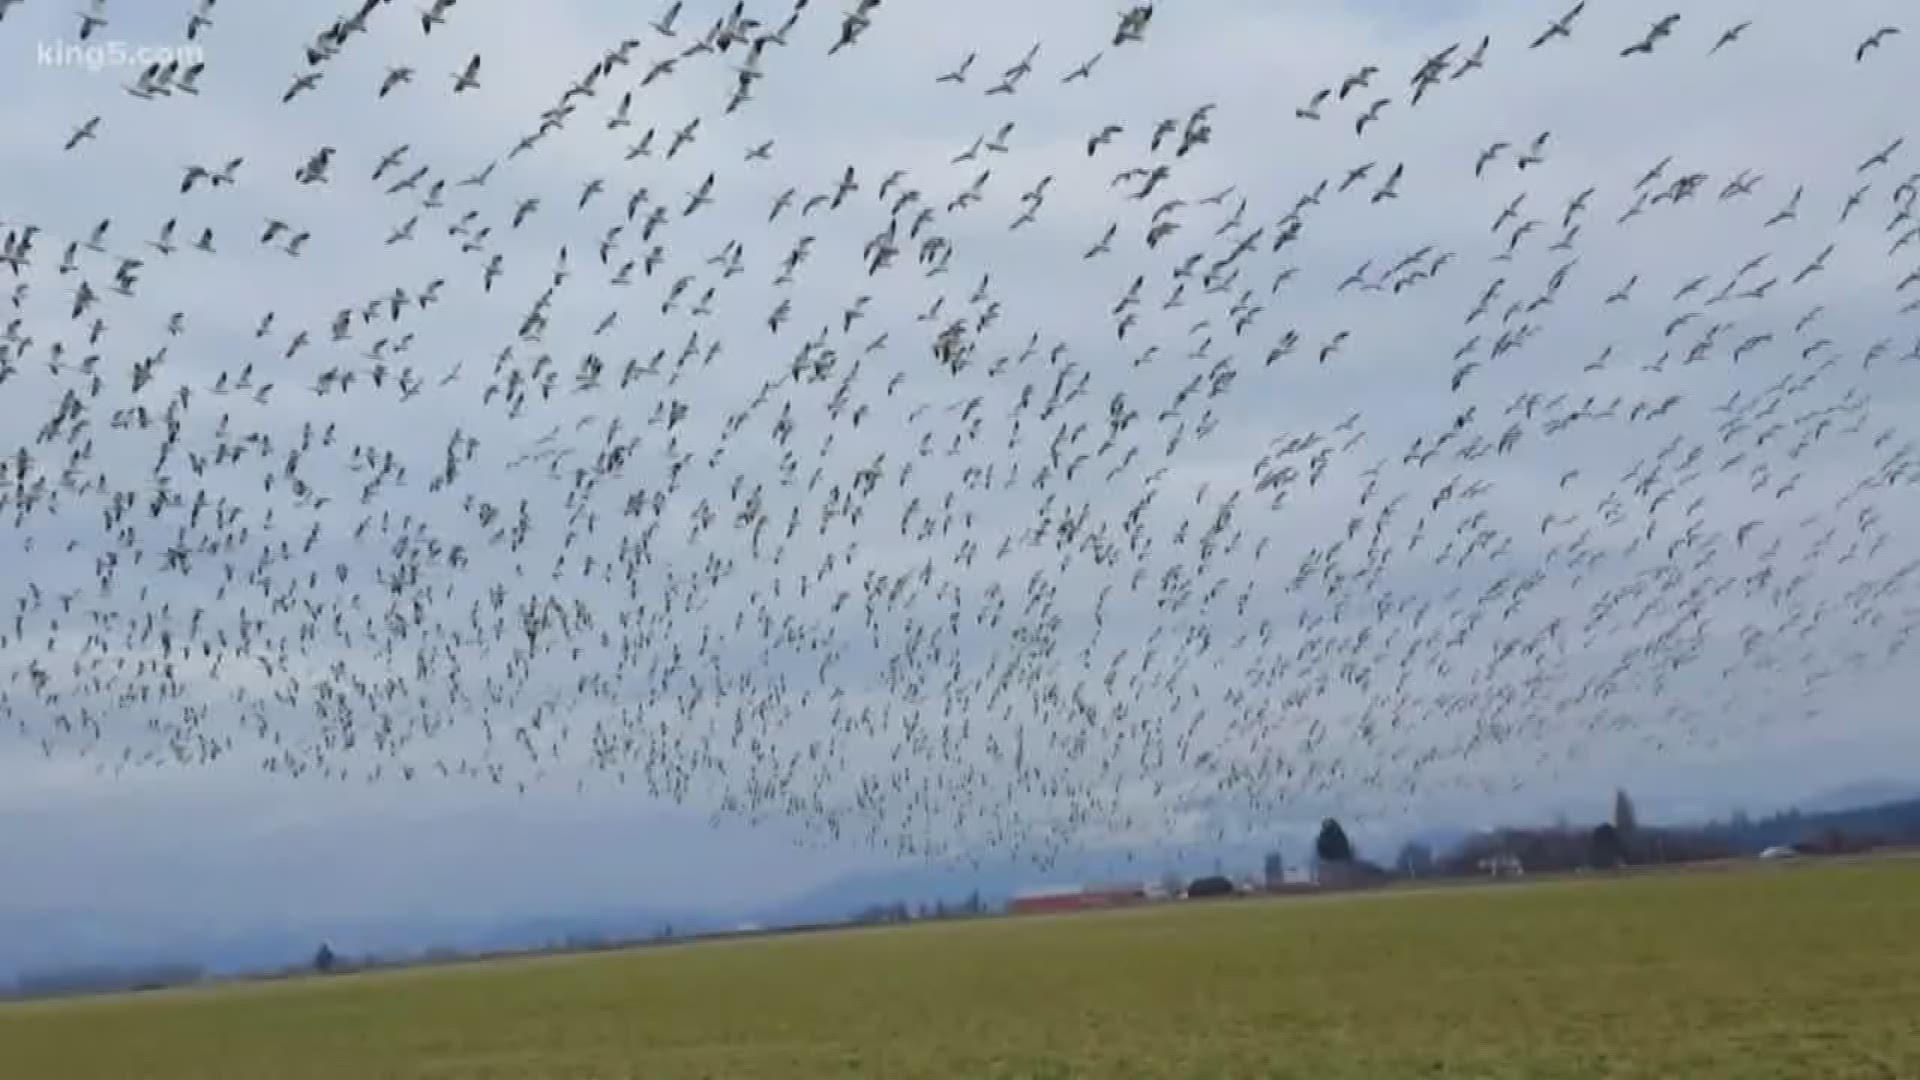 Swans, eagles, and geese, oh my! Many are excited about the annual bird-watching celebration in Skagit Valley. The event runs February 23-24.